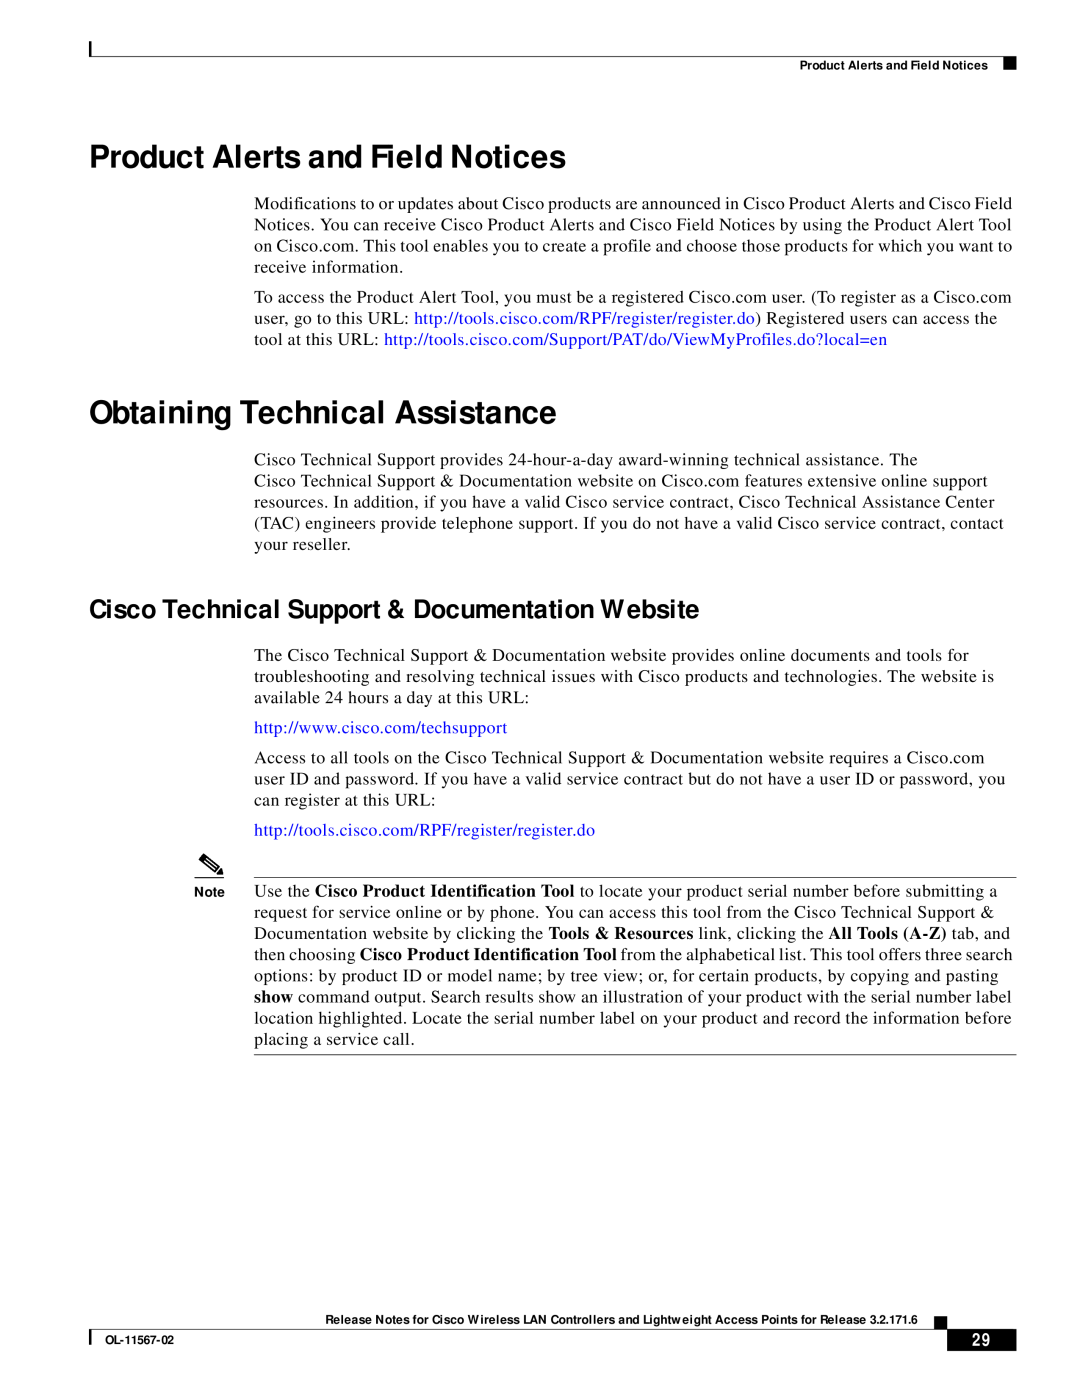 Cisco Systems OL-11567-02 manual Product Alerts and Field Notices, Obtaining Technical Assistance 